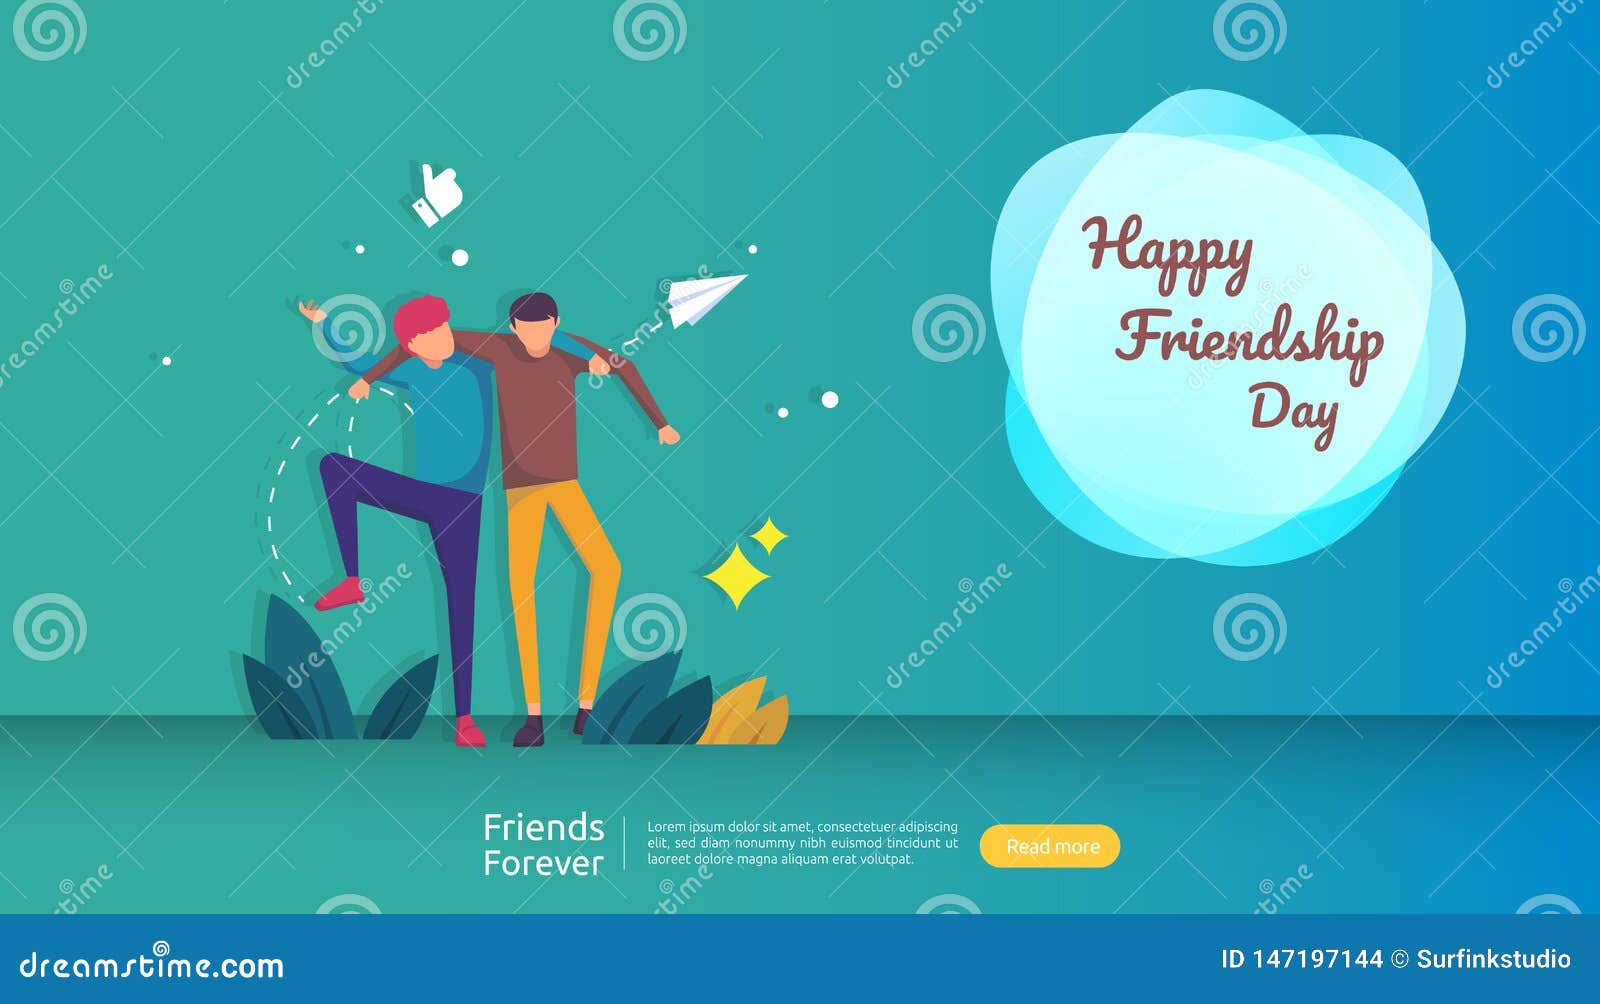 Best Friends Forever Concept for Celebrating Happy Friendship Day ...